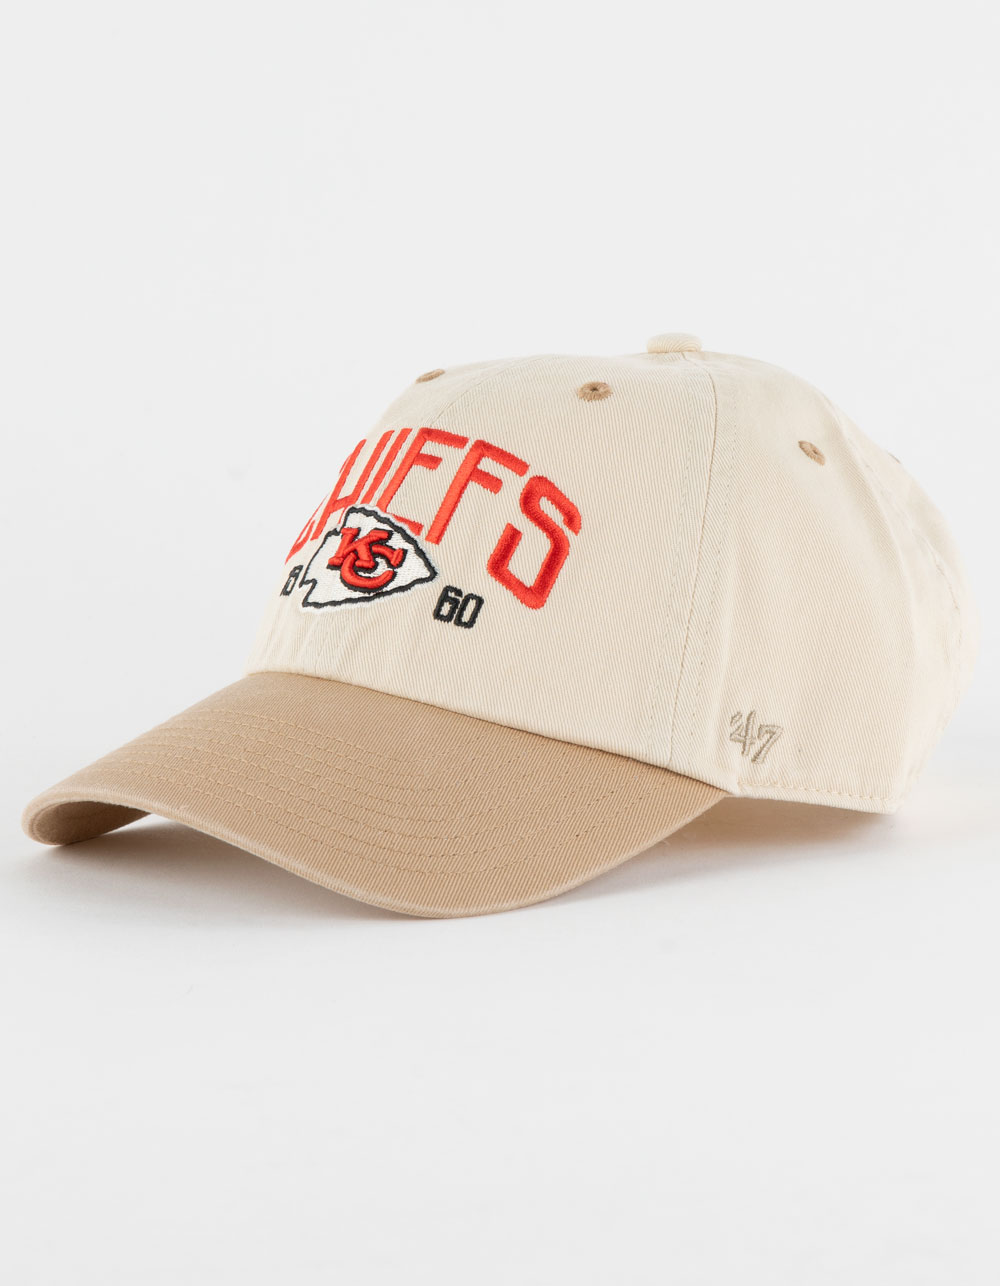 st. louis cardinals '47 clean up adjustable hat - red